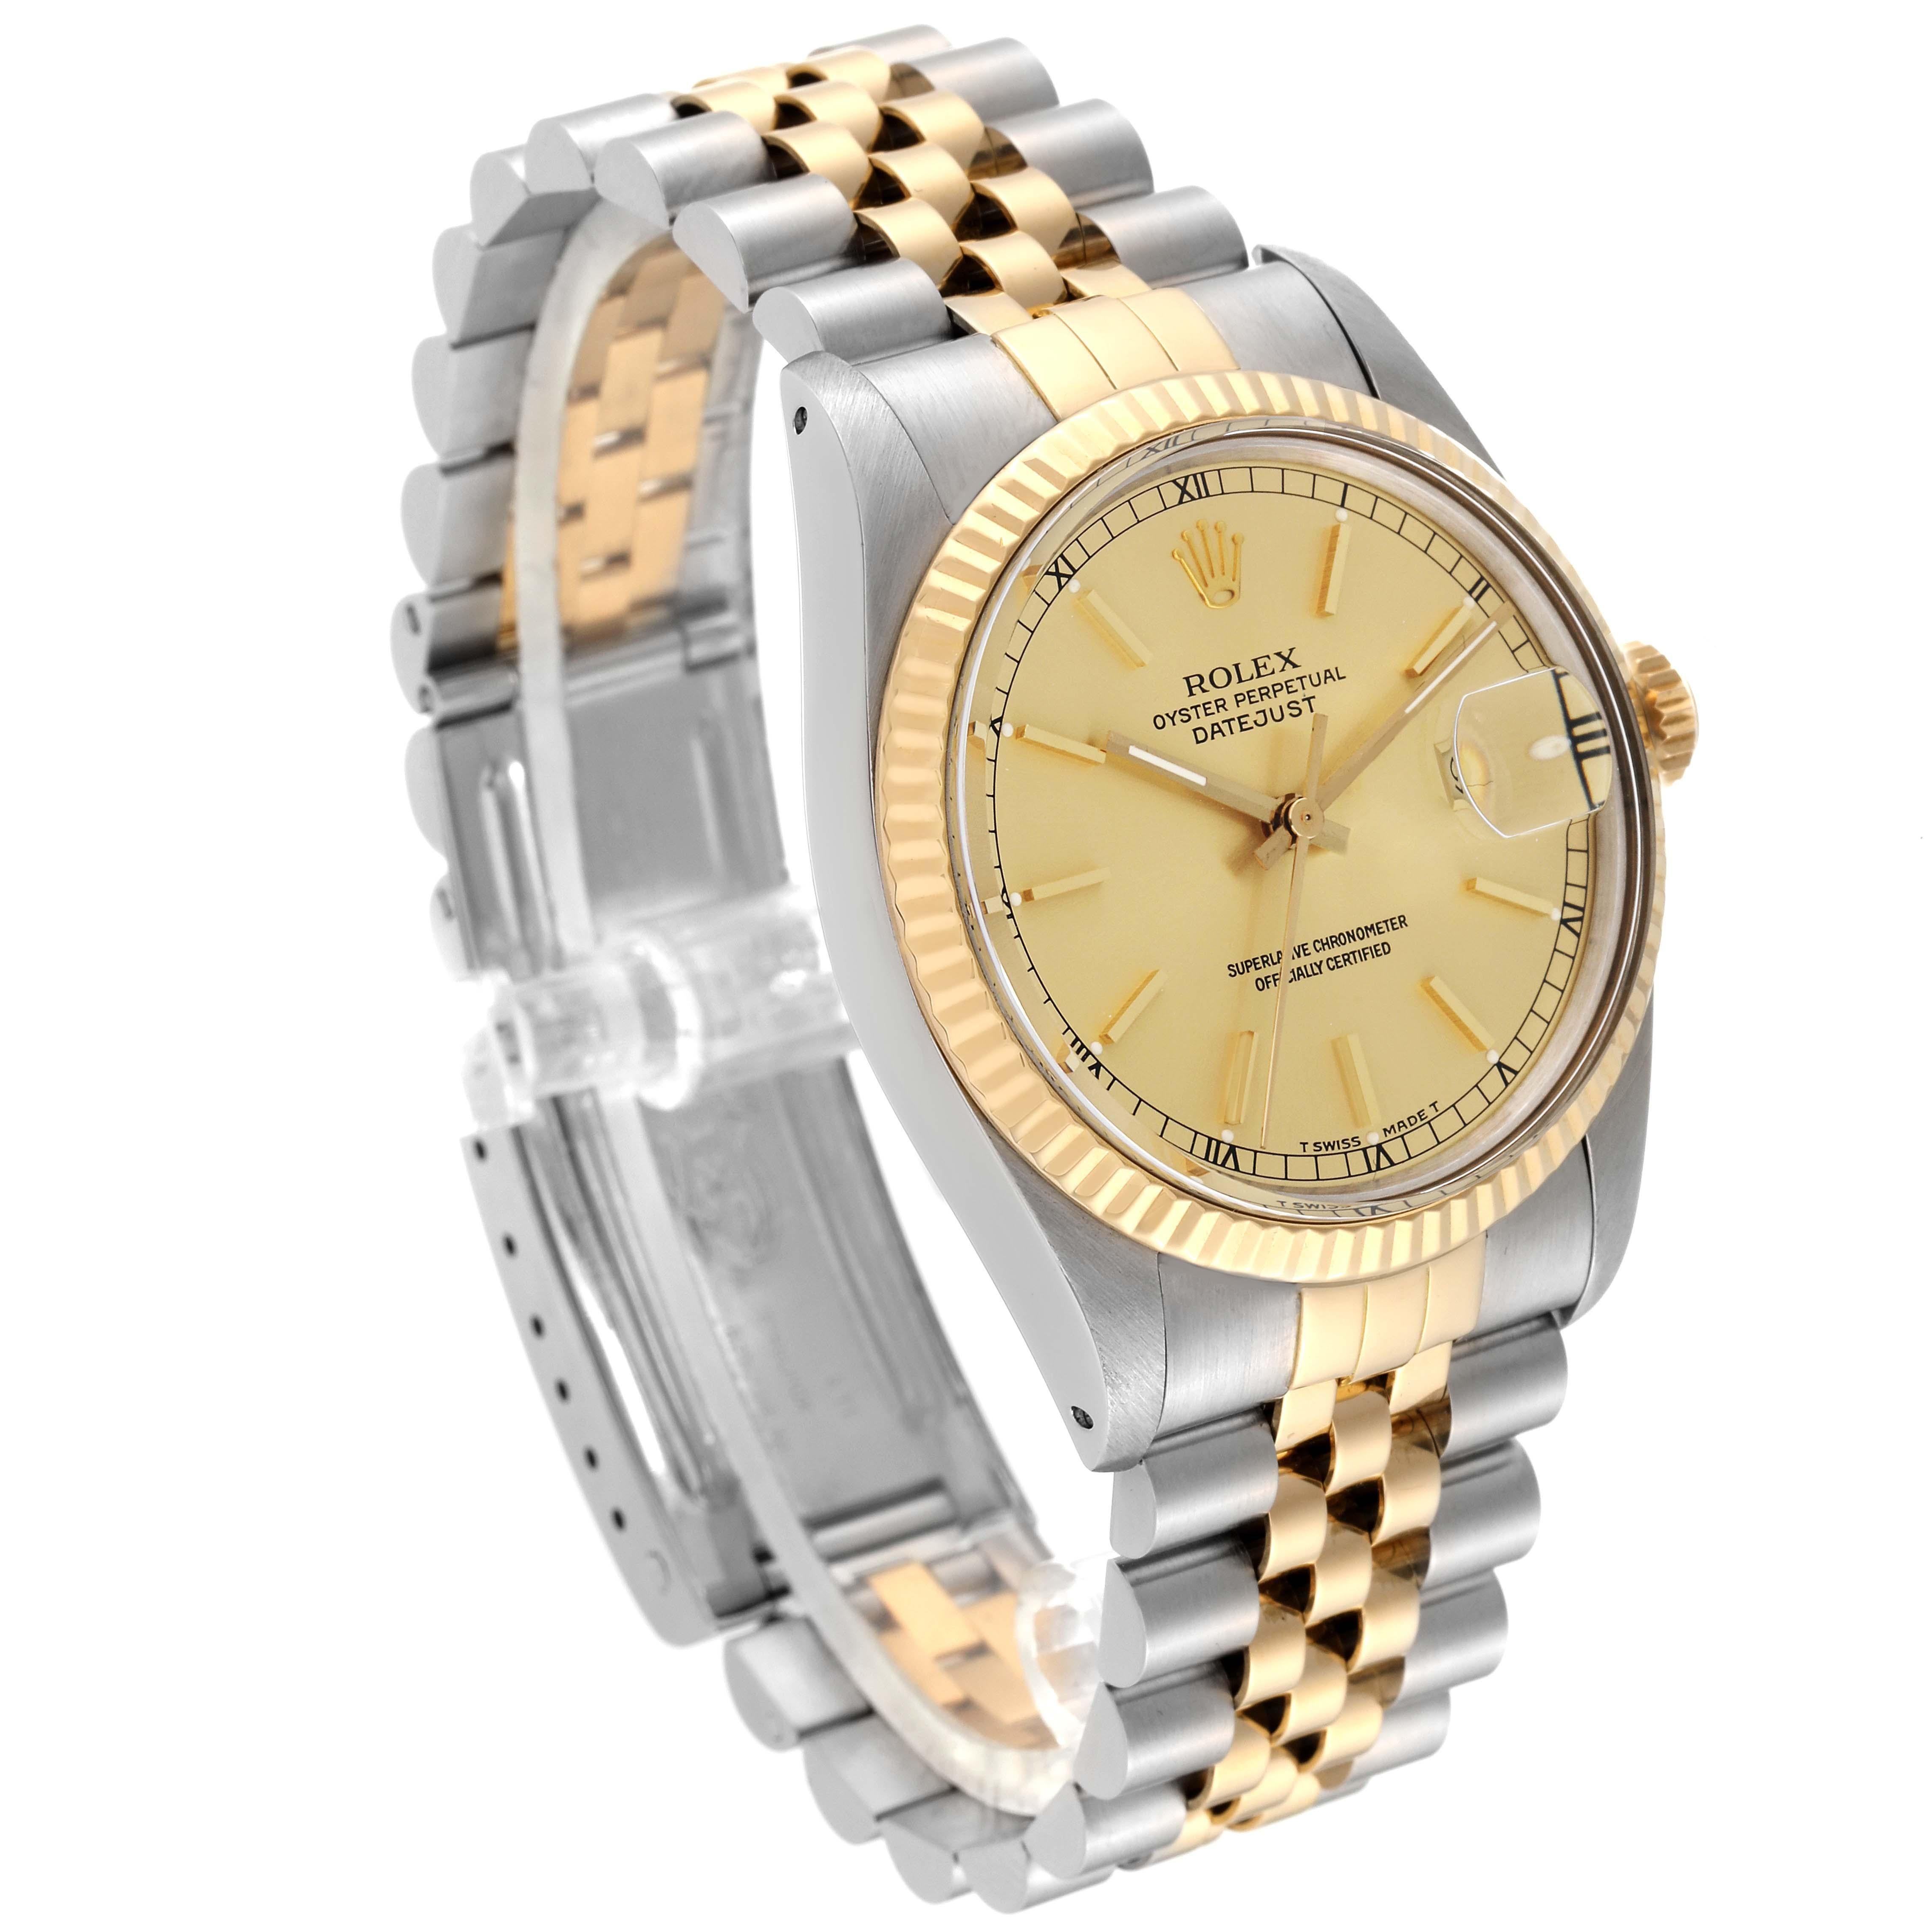 Men's Rolex Datejust Steel Yellow Gold Vintage Mens Watch 16013 Box Card For Sale